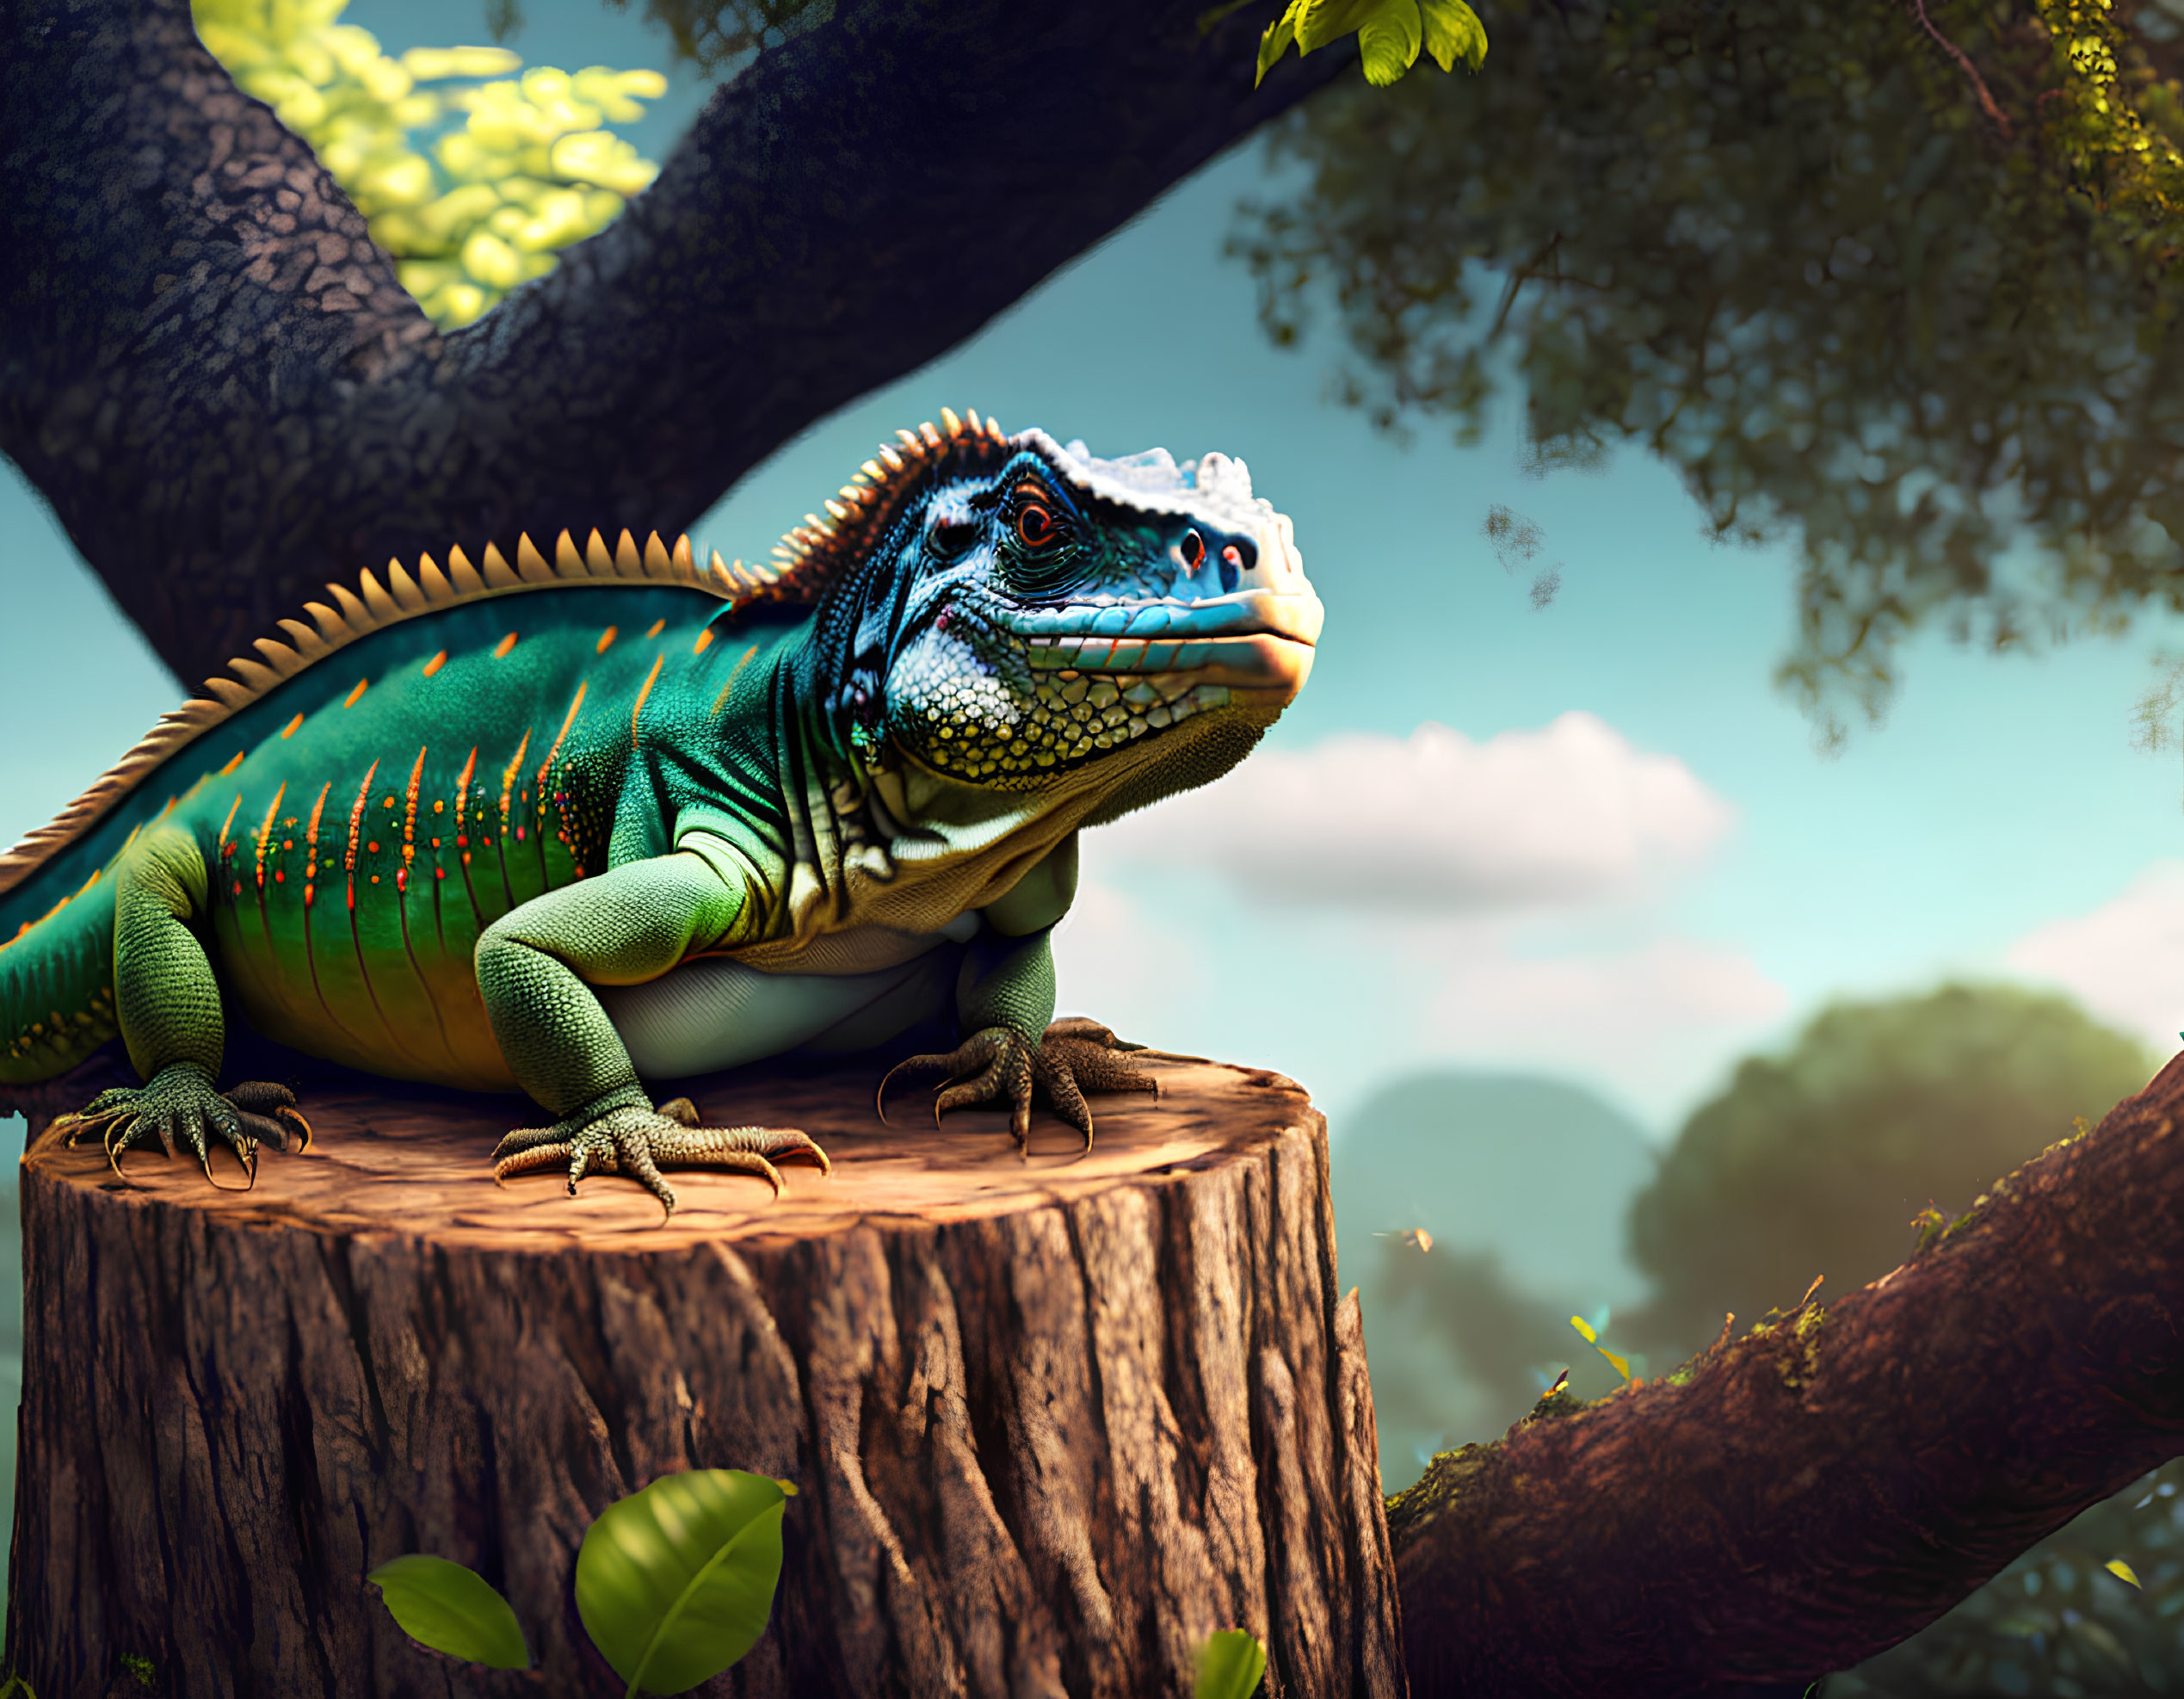 Vibrant green iguana on tree stump in lush forest with clear blue sky